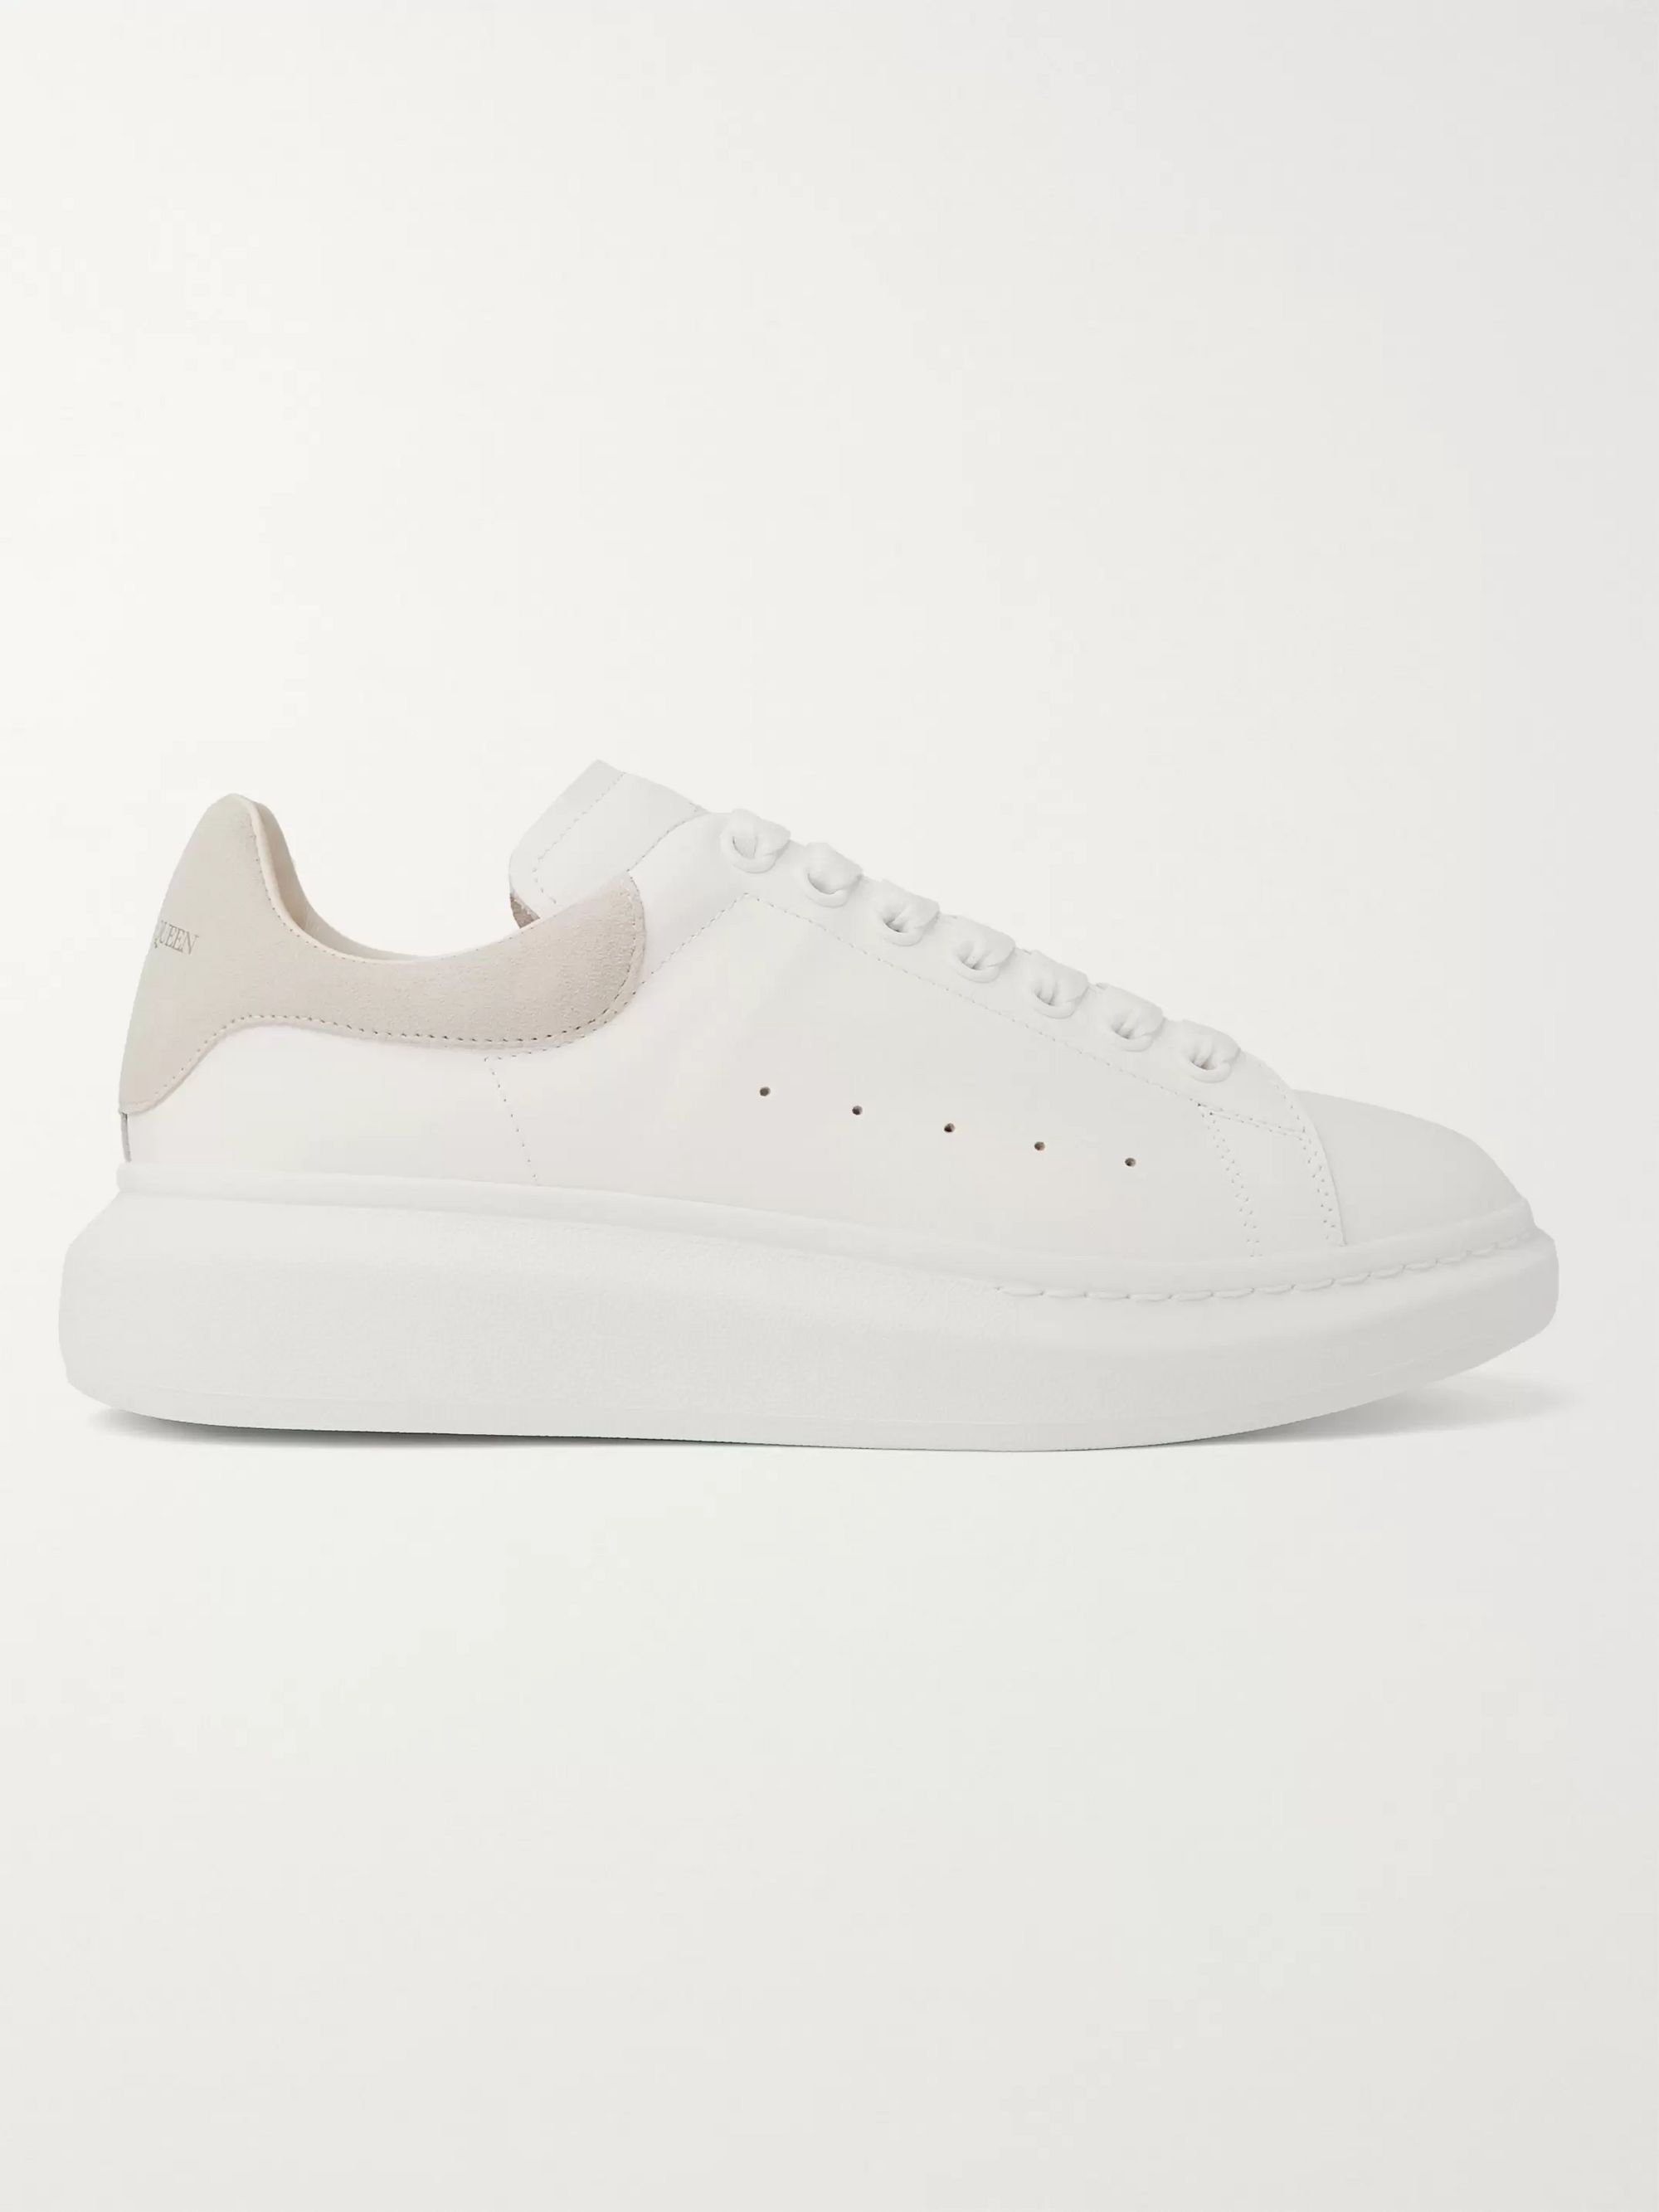 alexander mcqueen exaggerated sole sneakers